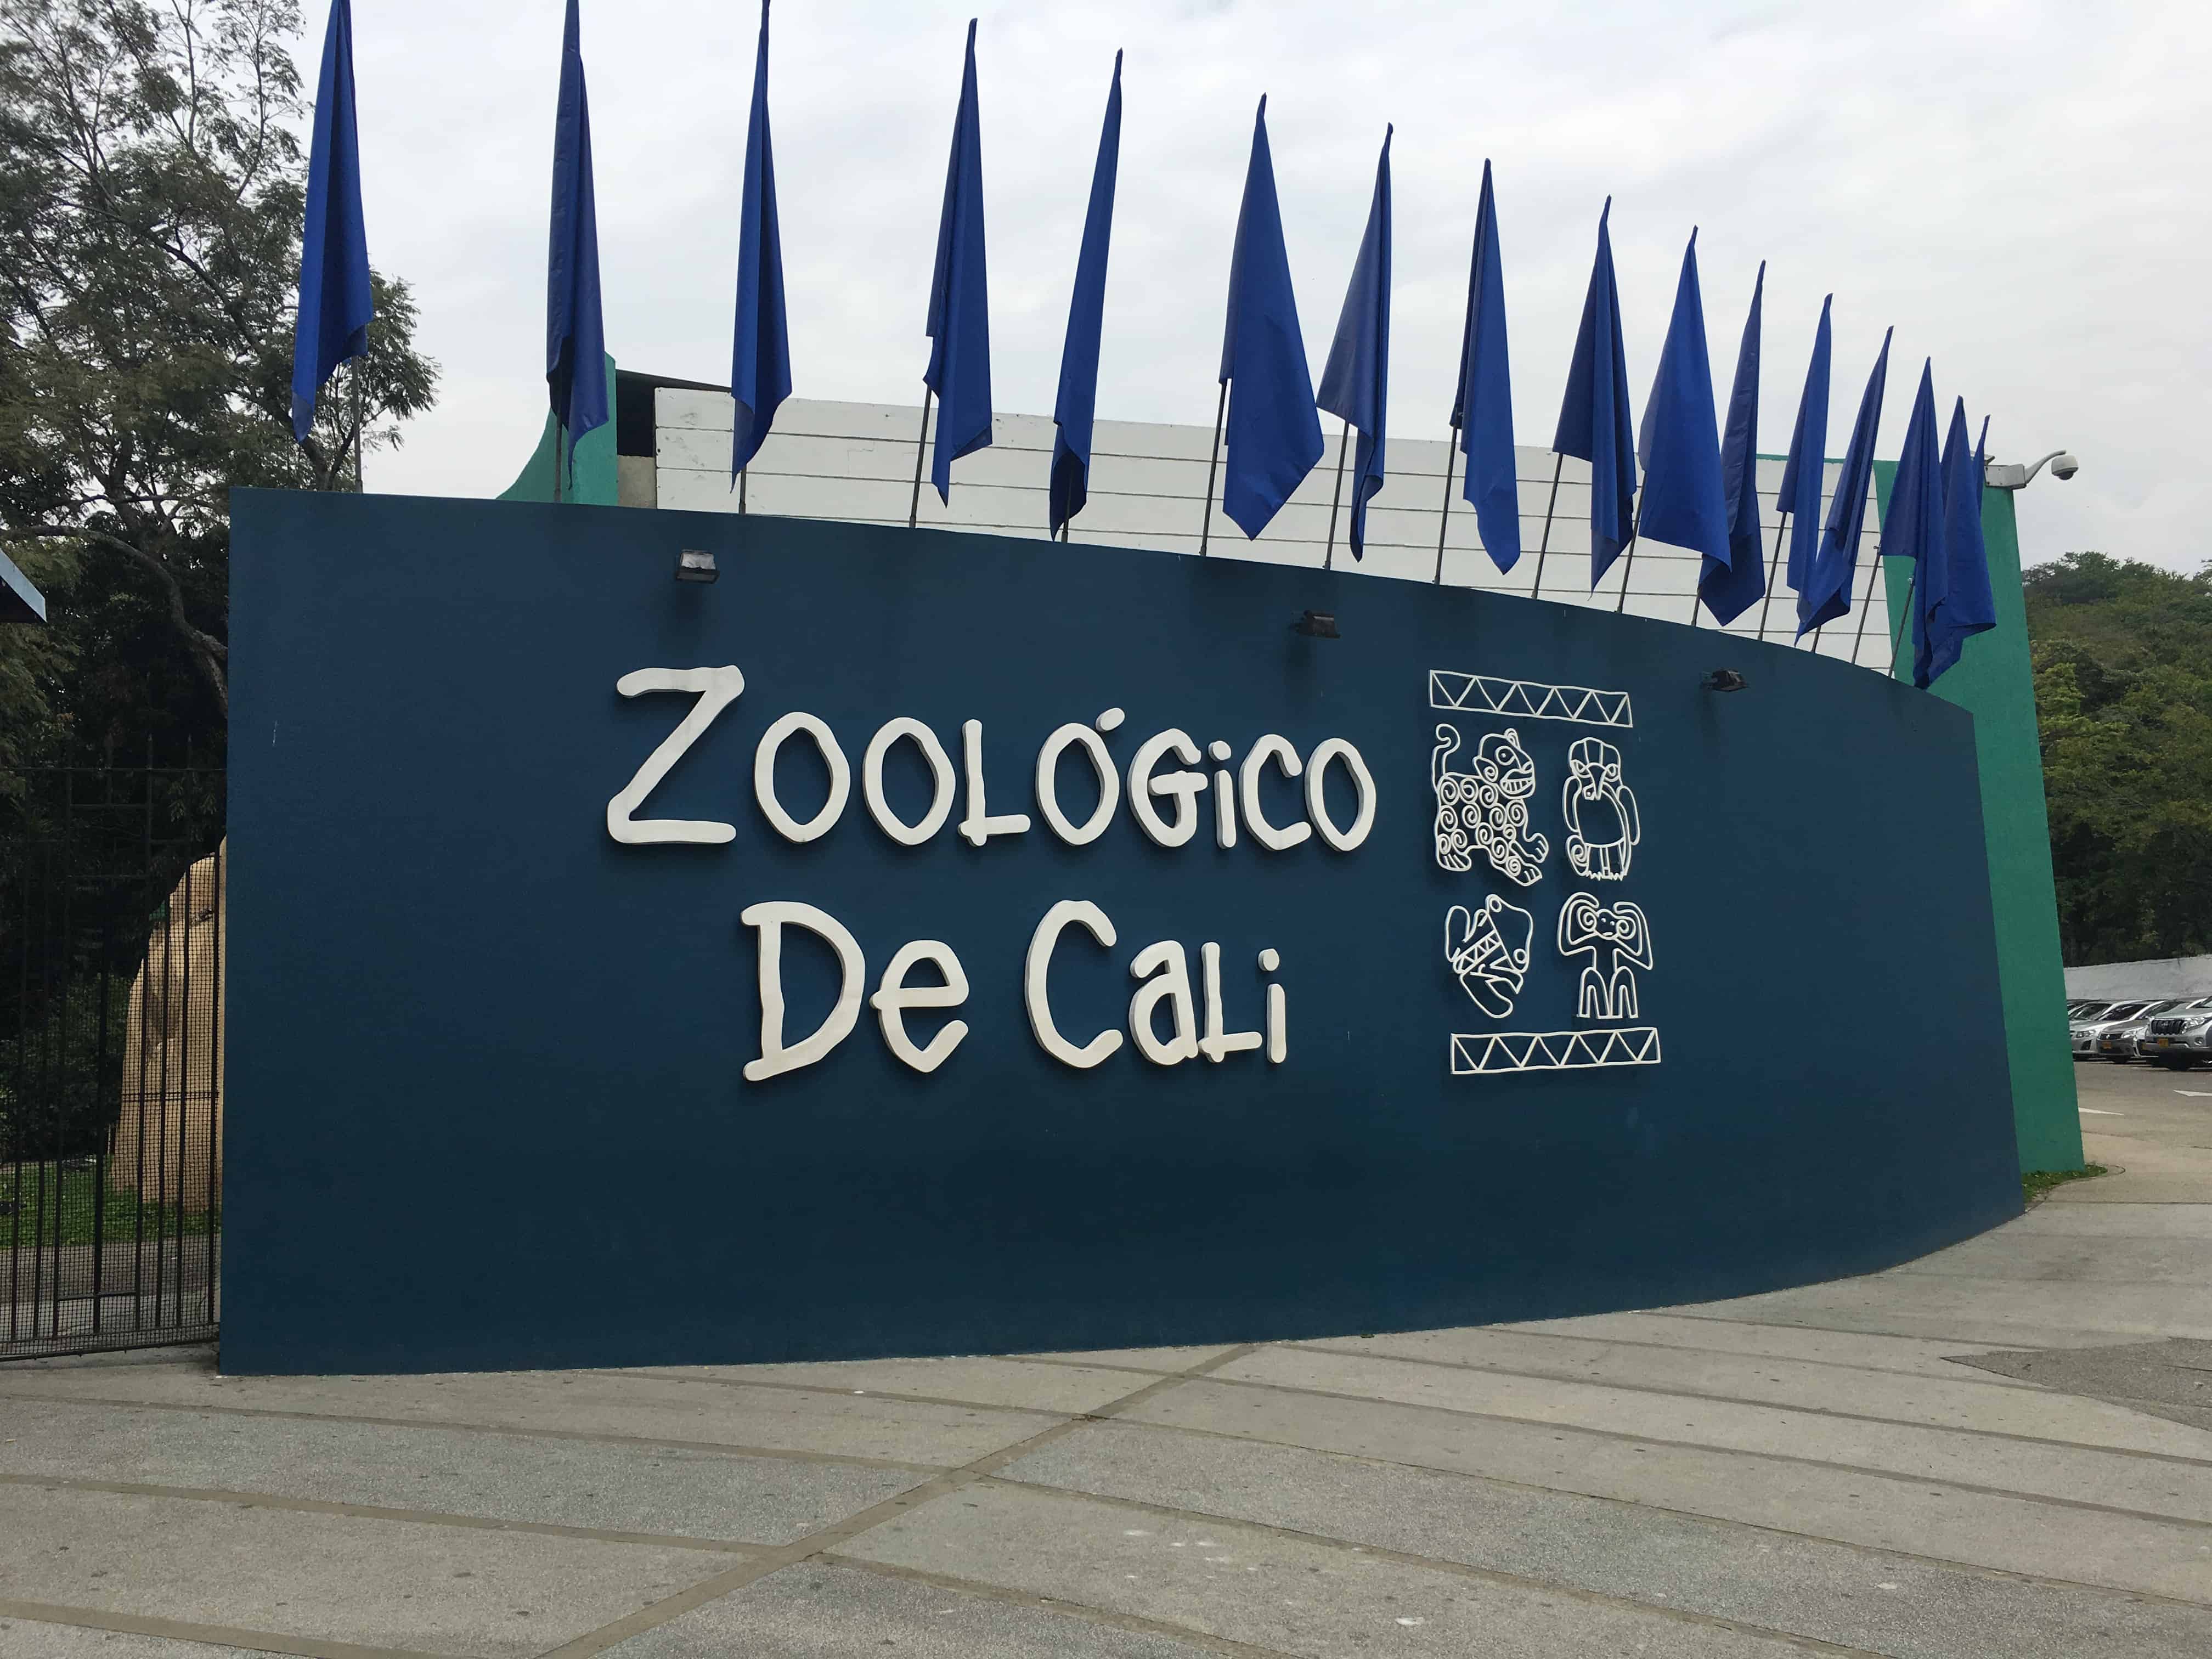 Cali Zoo in Colombia